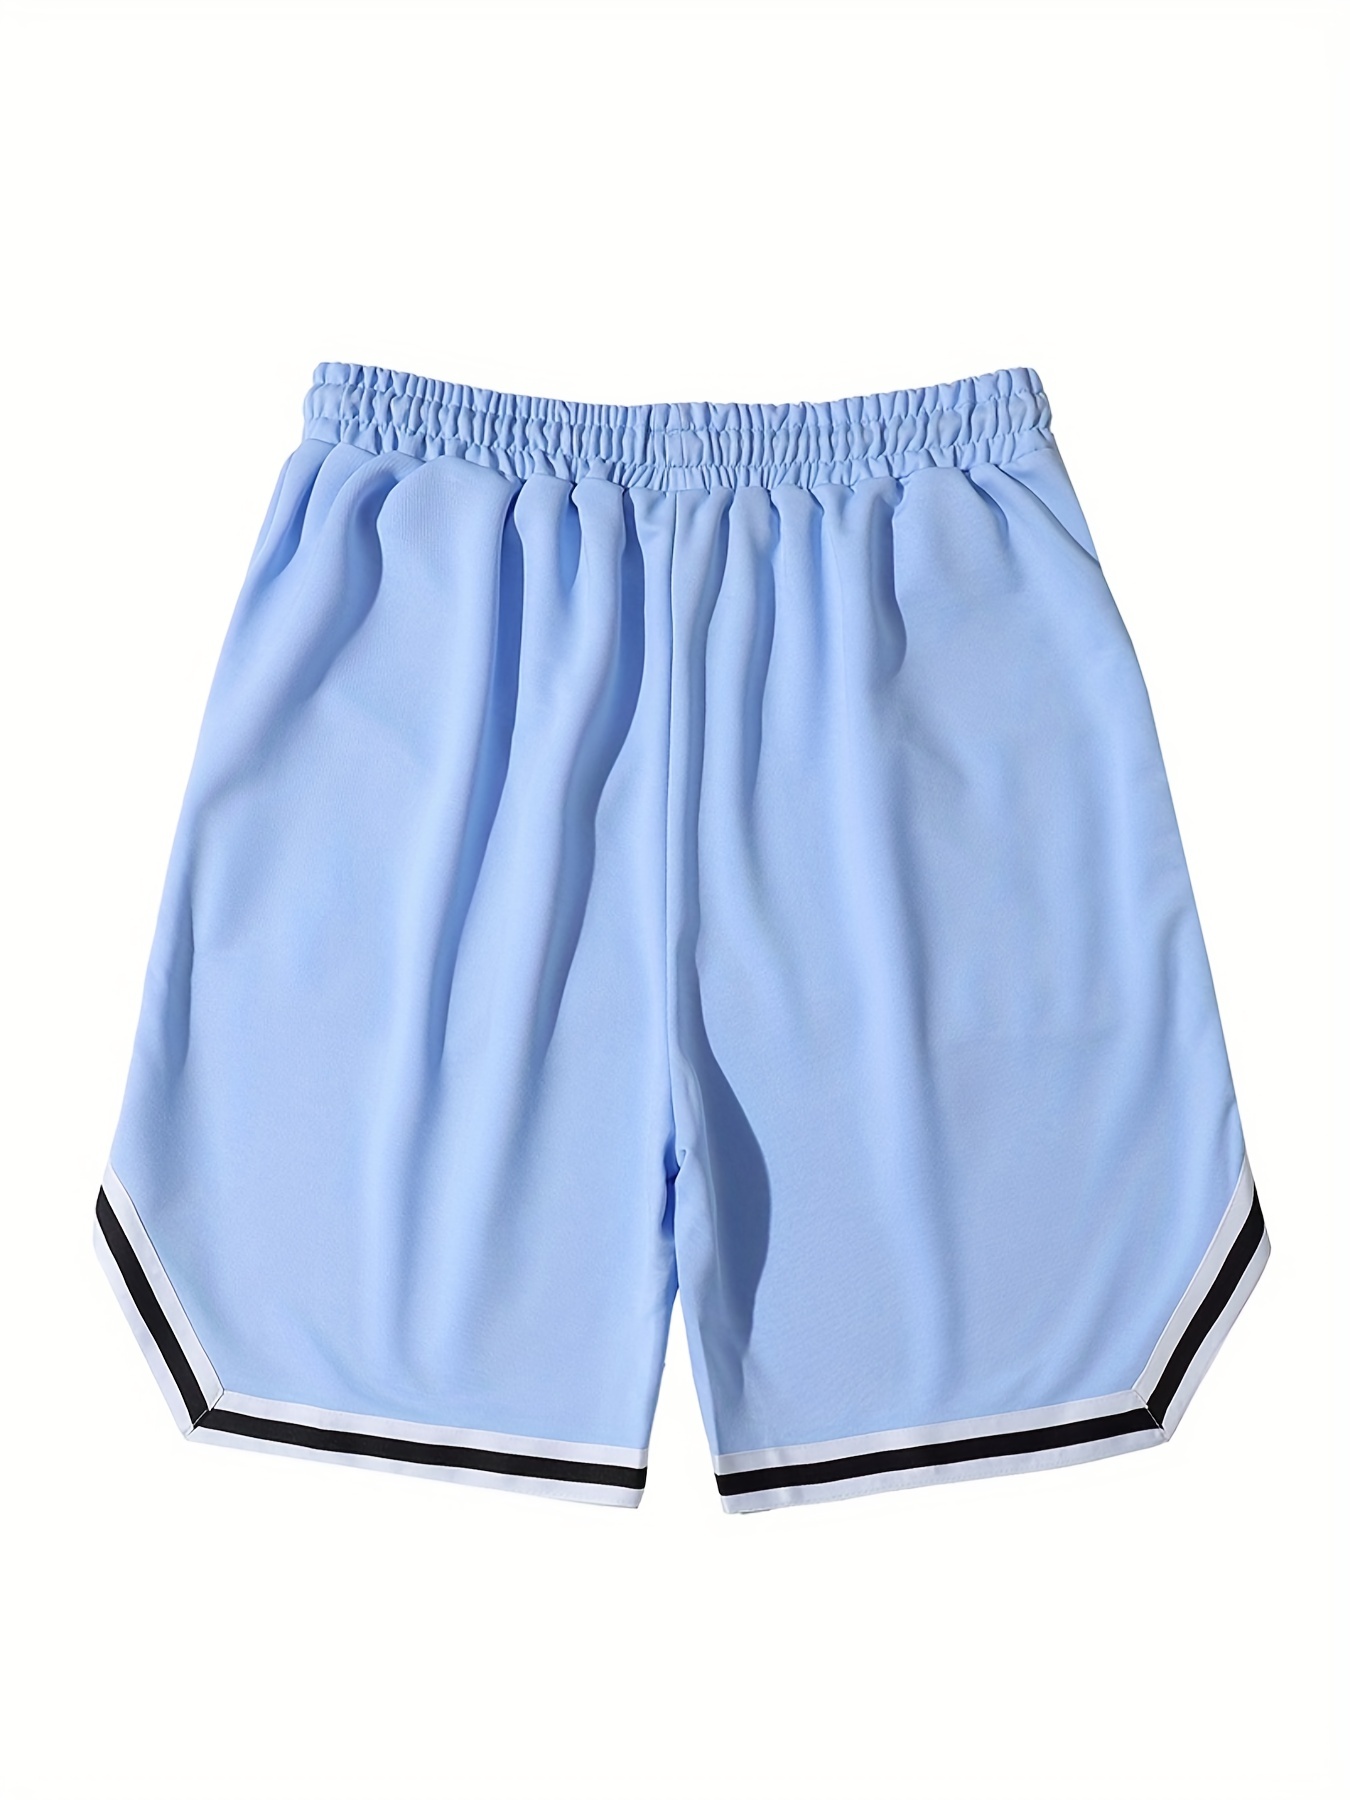 Trendsetting plain basketball shorts For Leisure And Fashion 